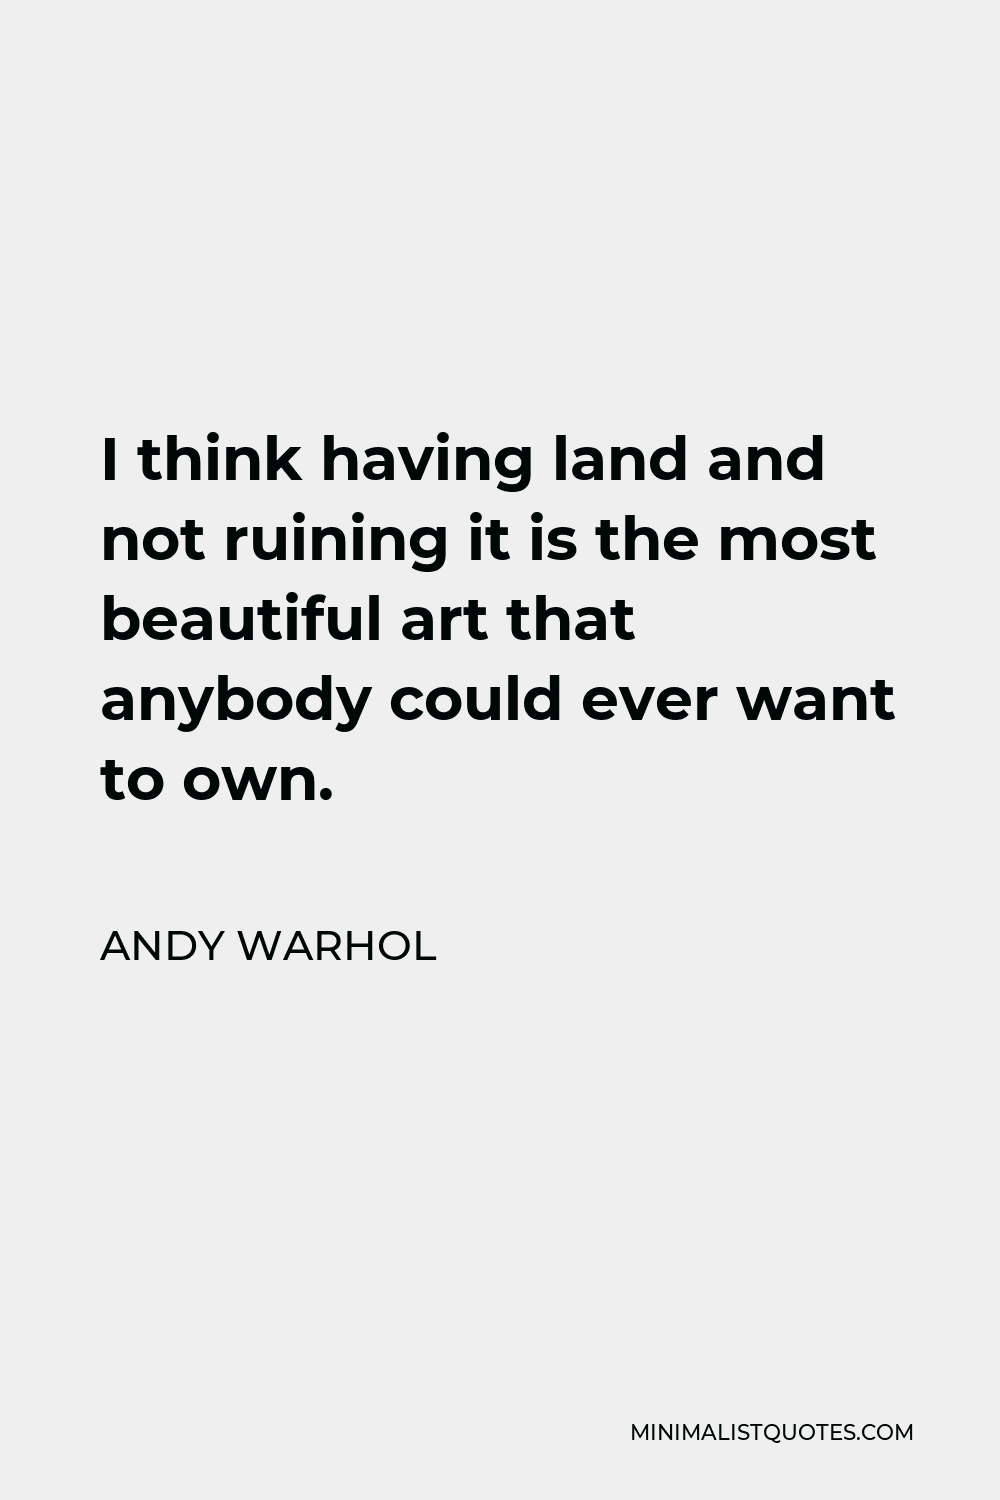 Andy Warhol Quote - I think having land and not ruining it is the most beautiful art that anybody could ever want to own.